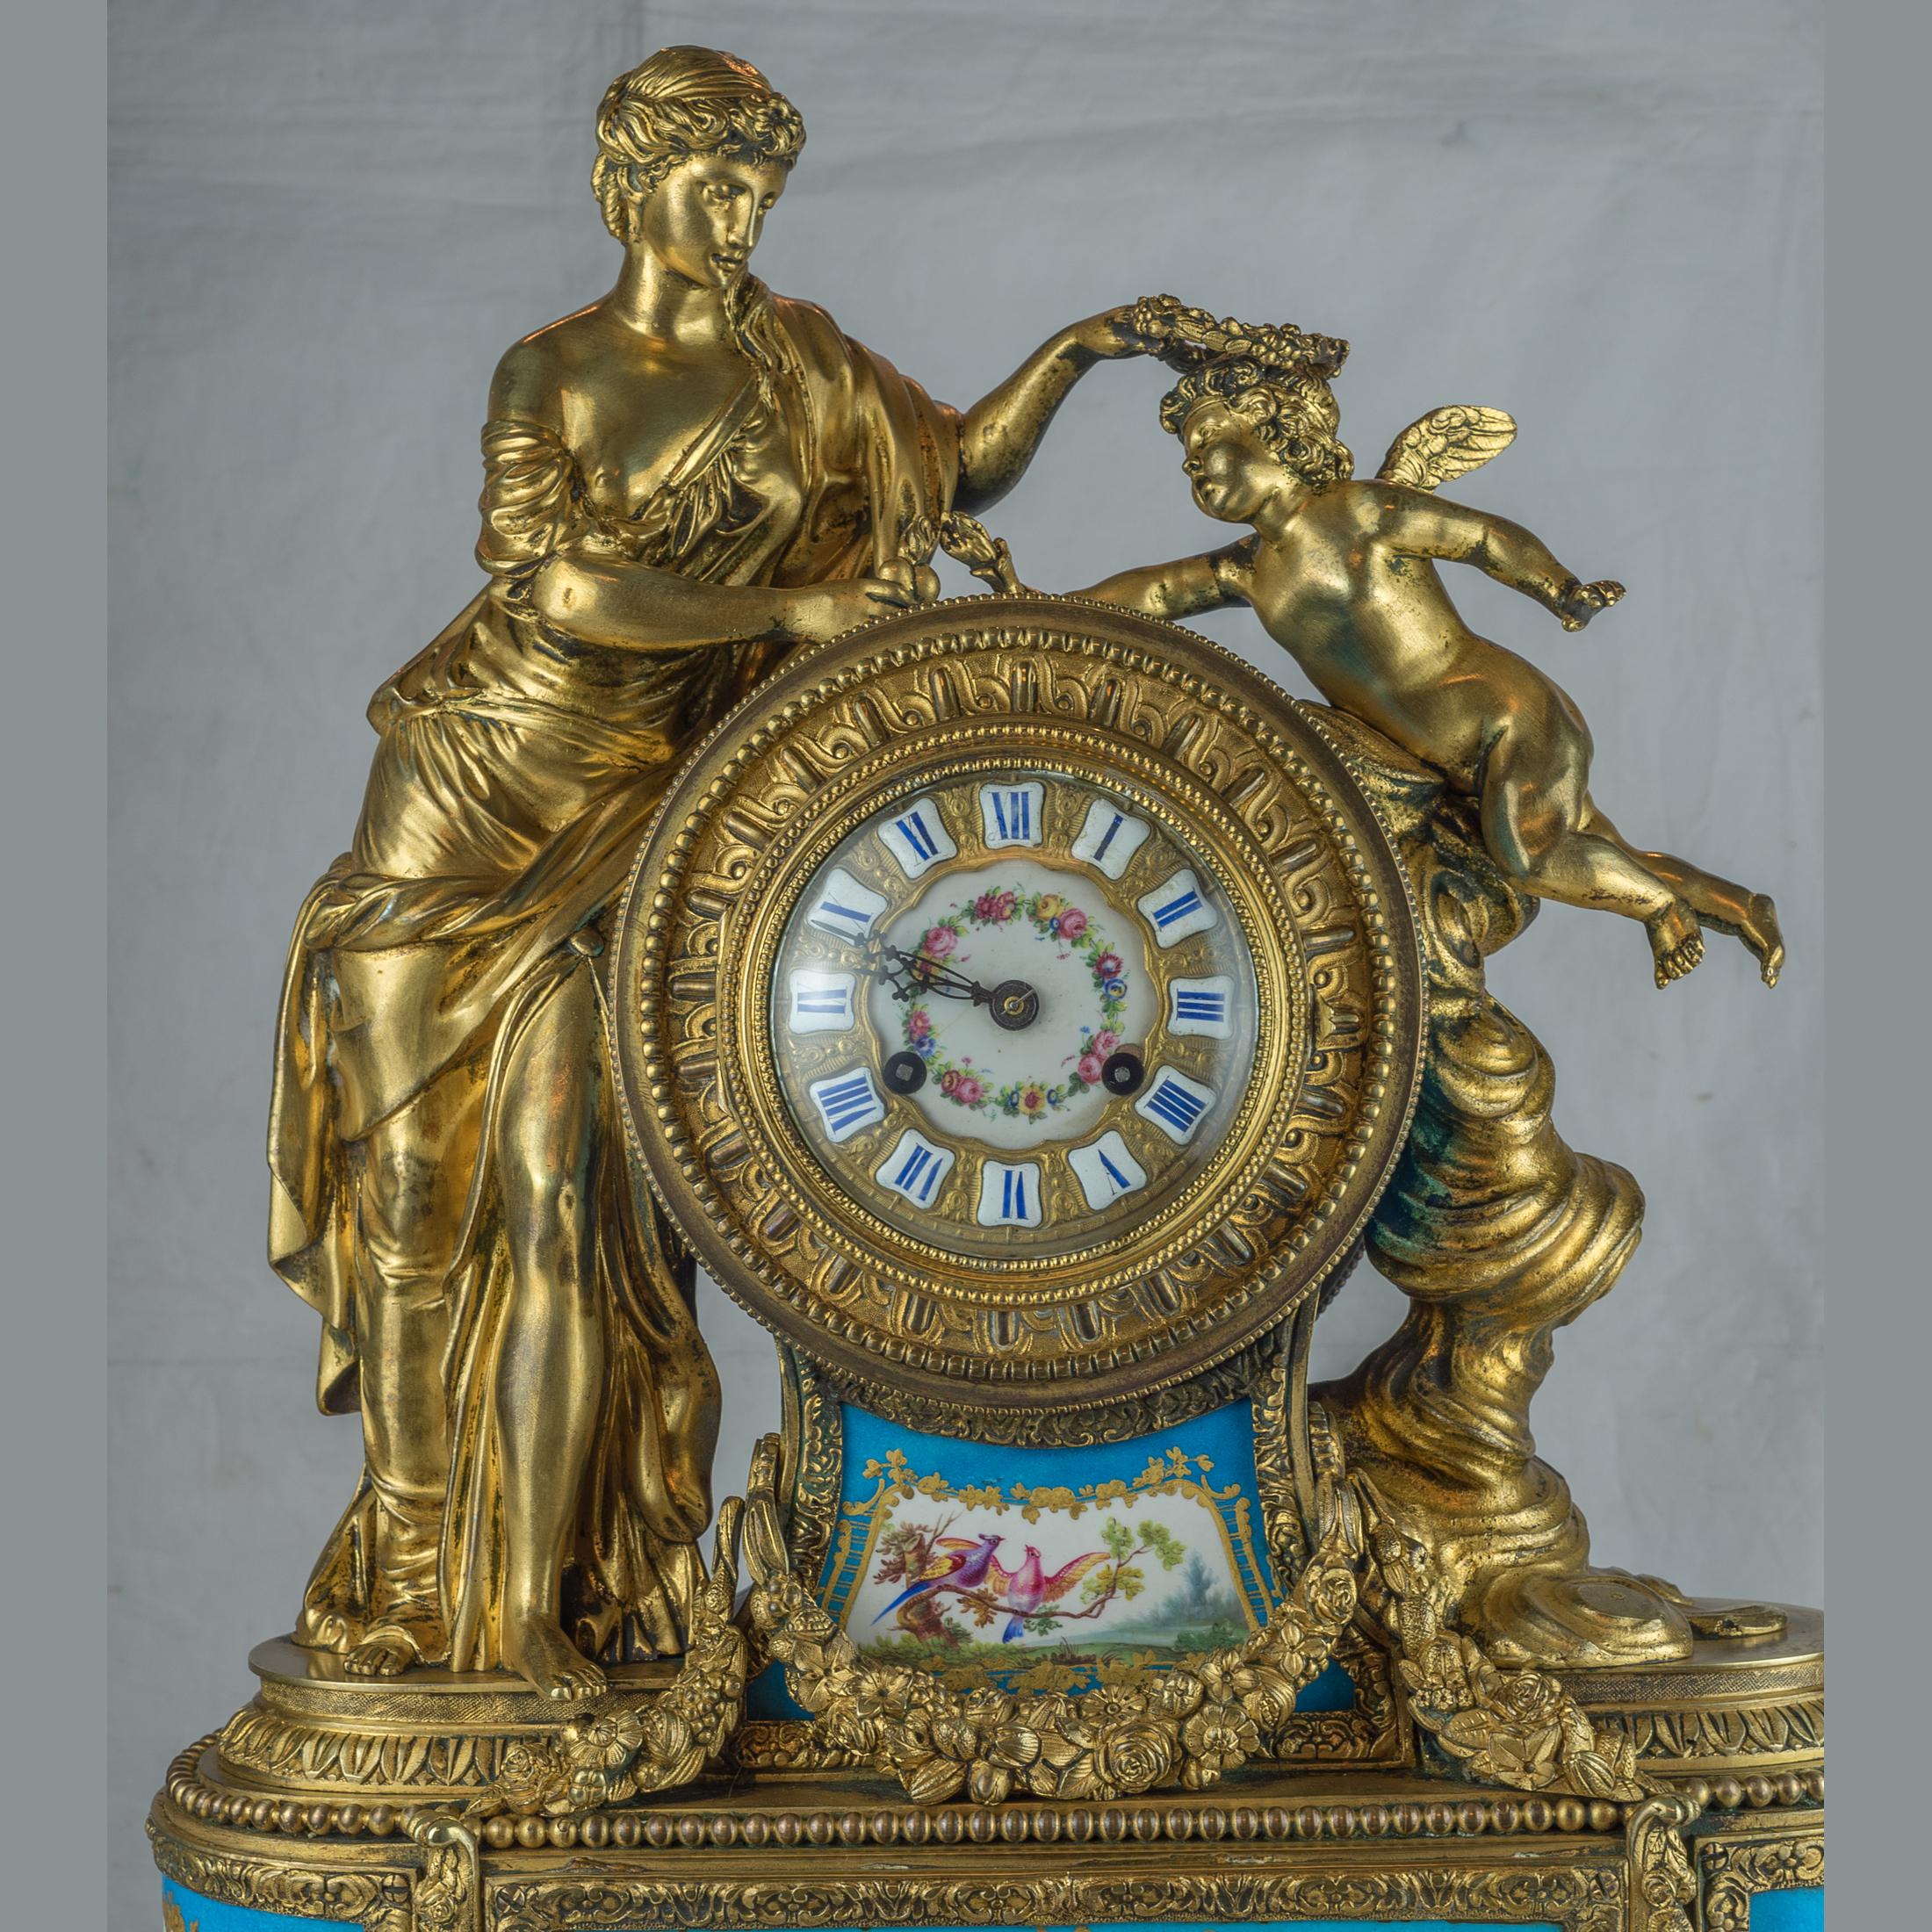 A fine quality gilt bronze and porcelain figural mantel clock. The figure of a maiden placing a garland of flowers over the cherub’s head. 

Origin: French
Date: circa 1880
Dimension: 23 in x 18 in.